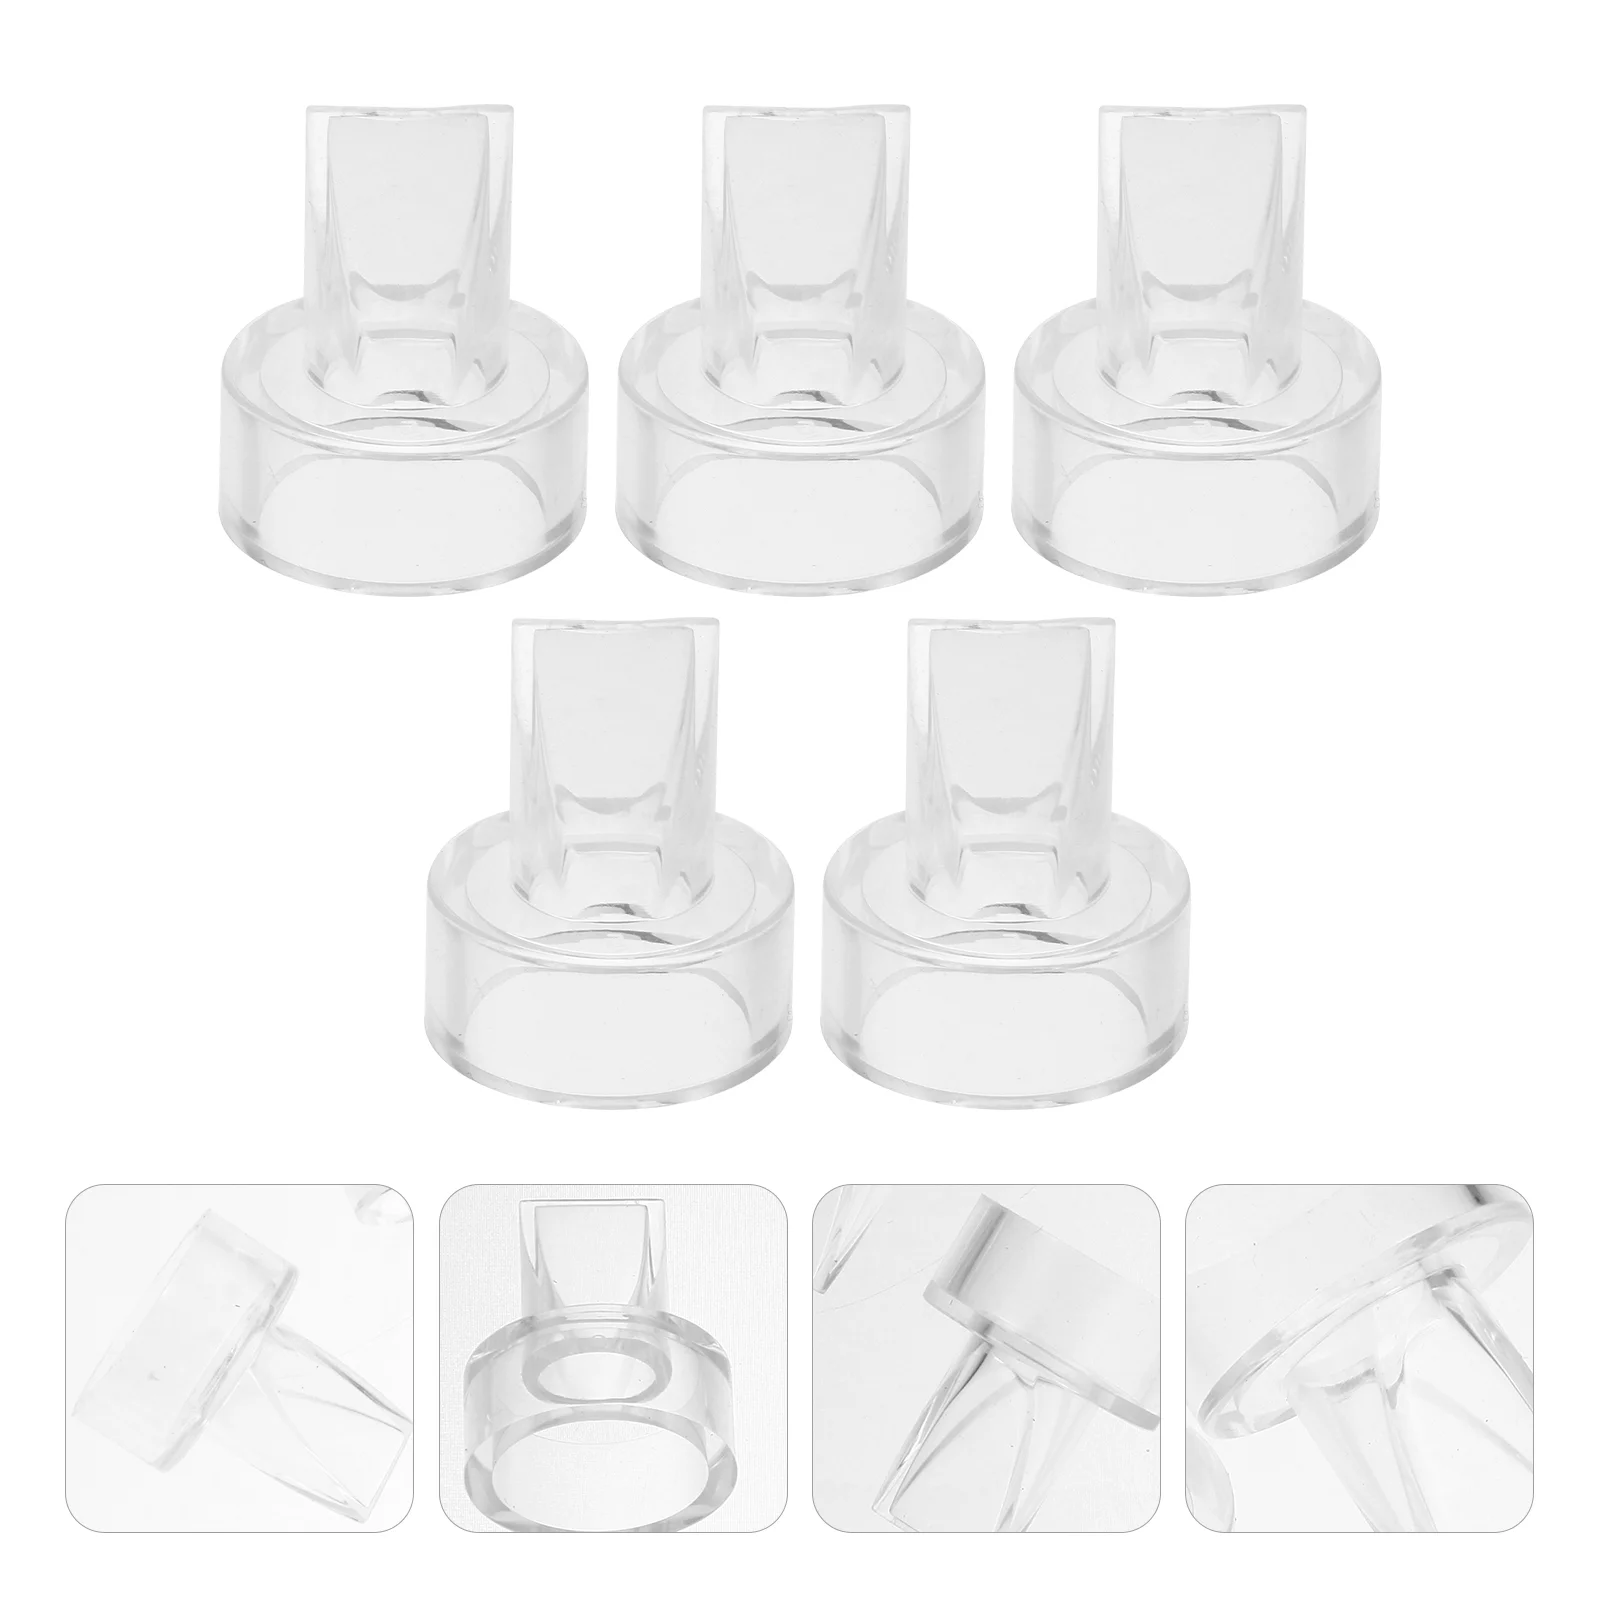 

5 Pcs Duckbill Valve Electric Breast Pumps Valves Anti Backflow Food Grade Silicone Parts Silica Gel Baby